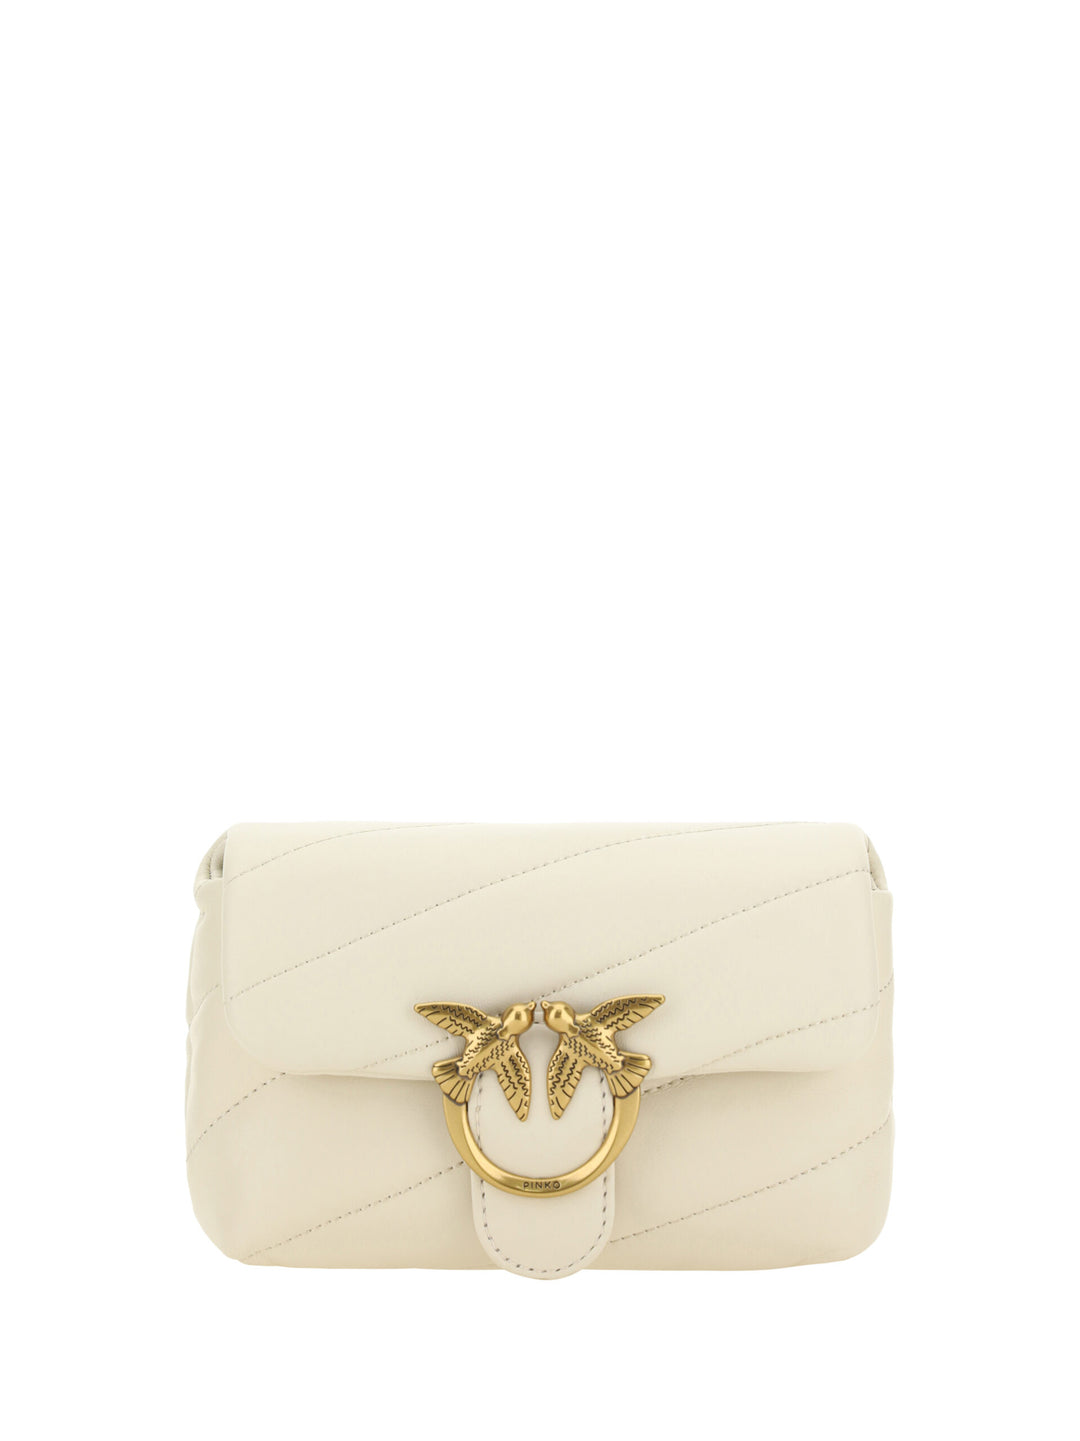 PINKO White Calf Leather Love Baby Small Shoulder Bag